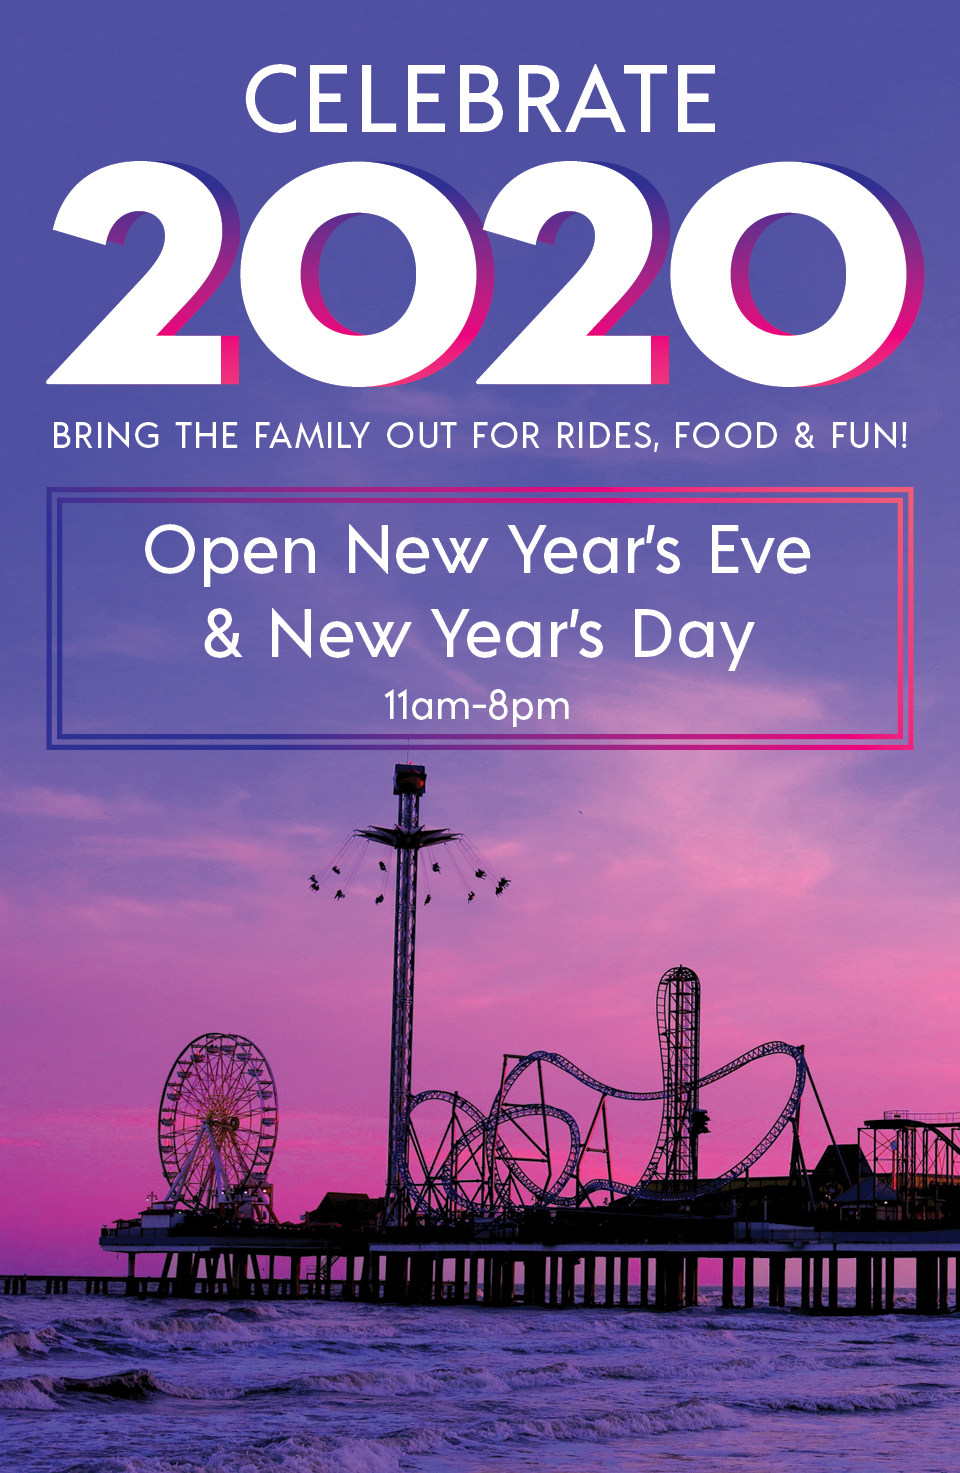 Celebrate 2020 - Open New Year's Eve